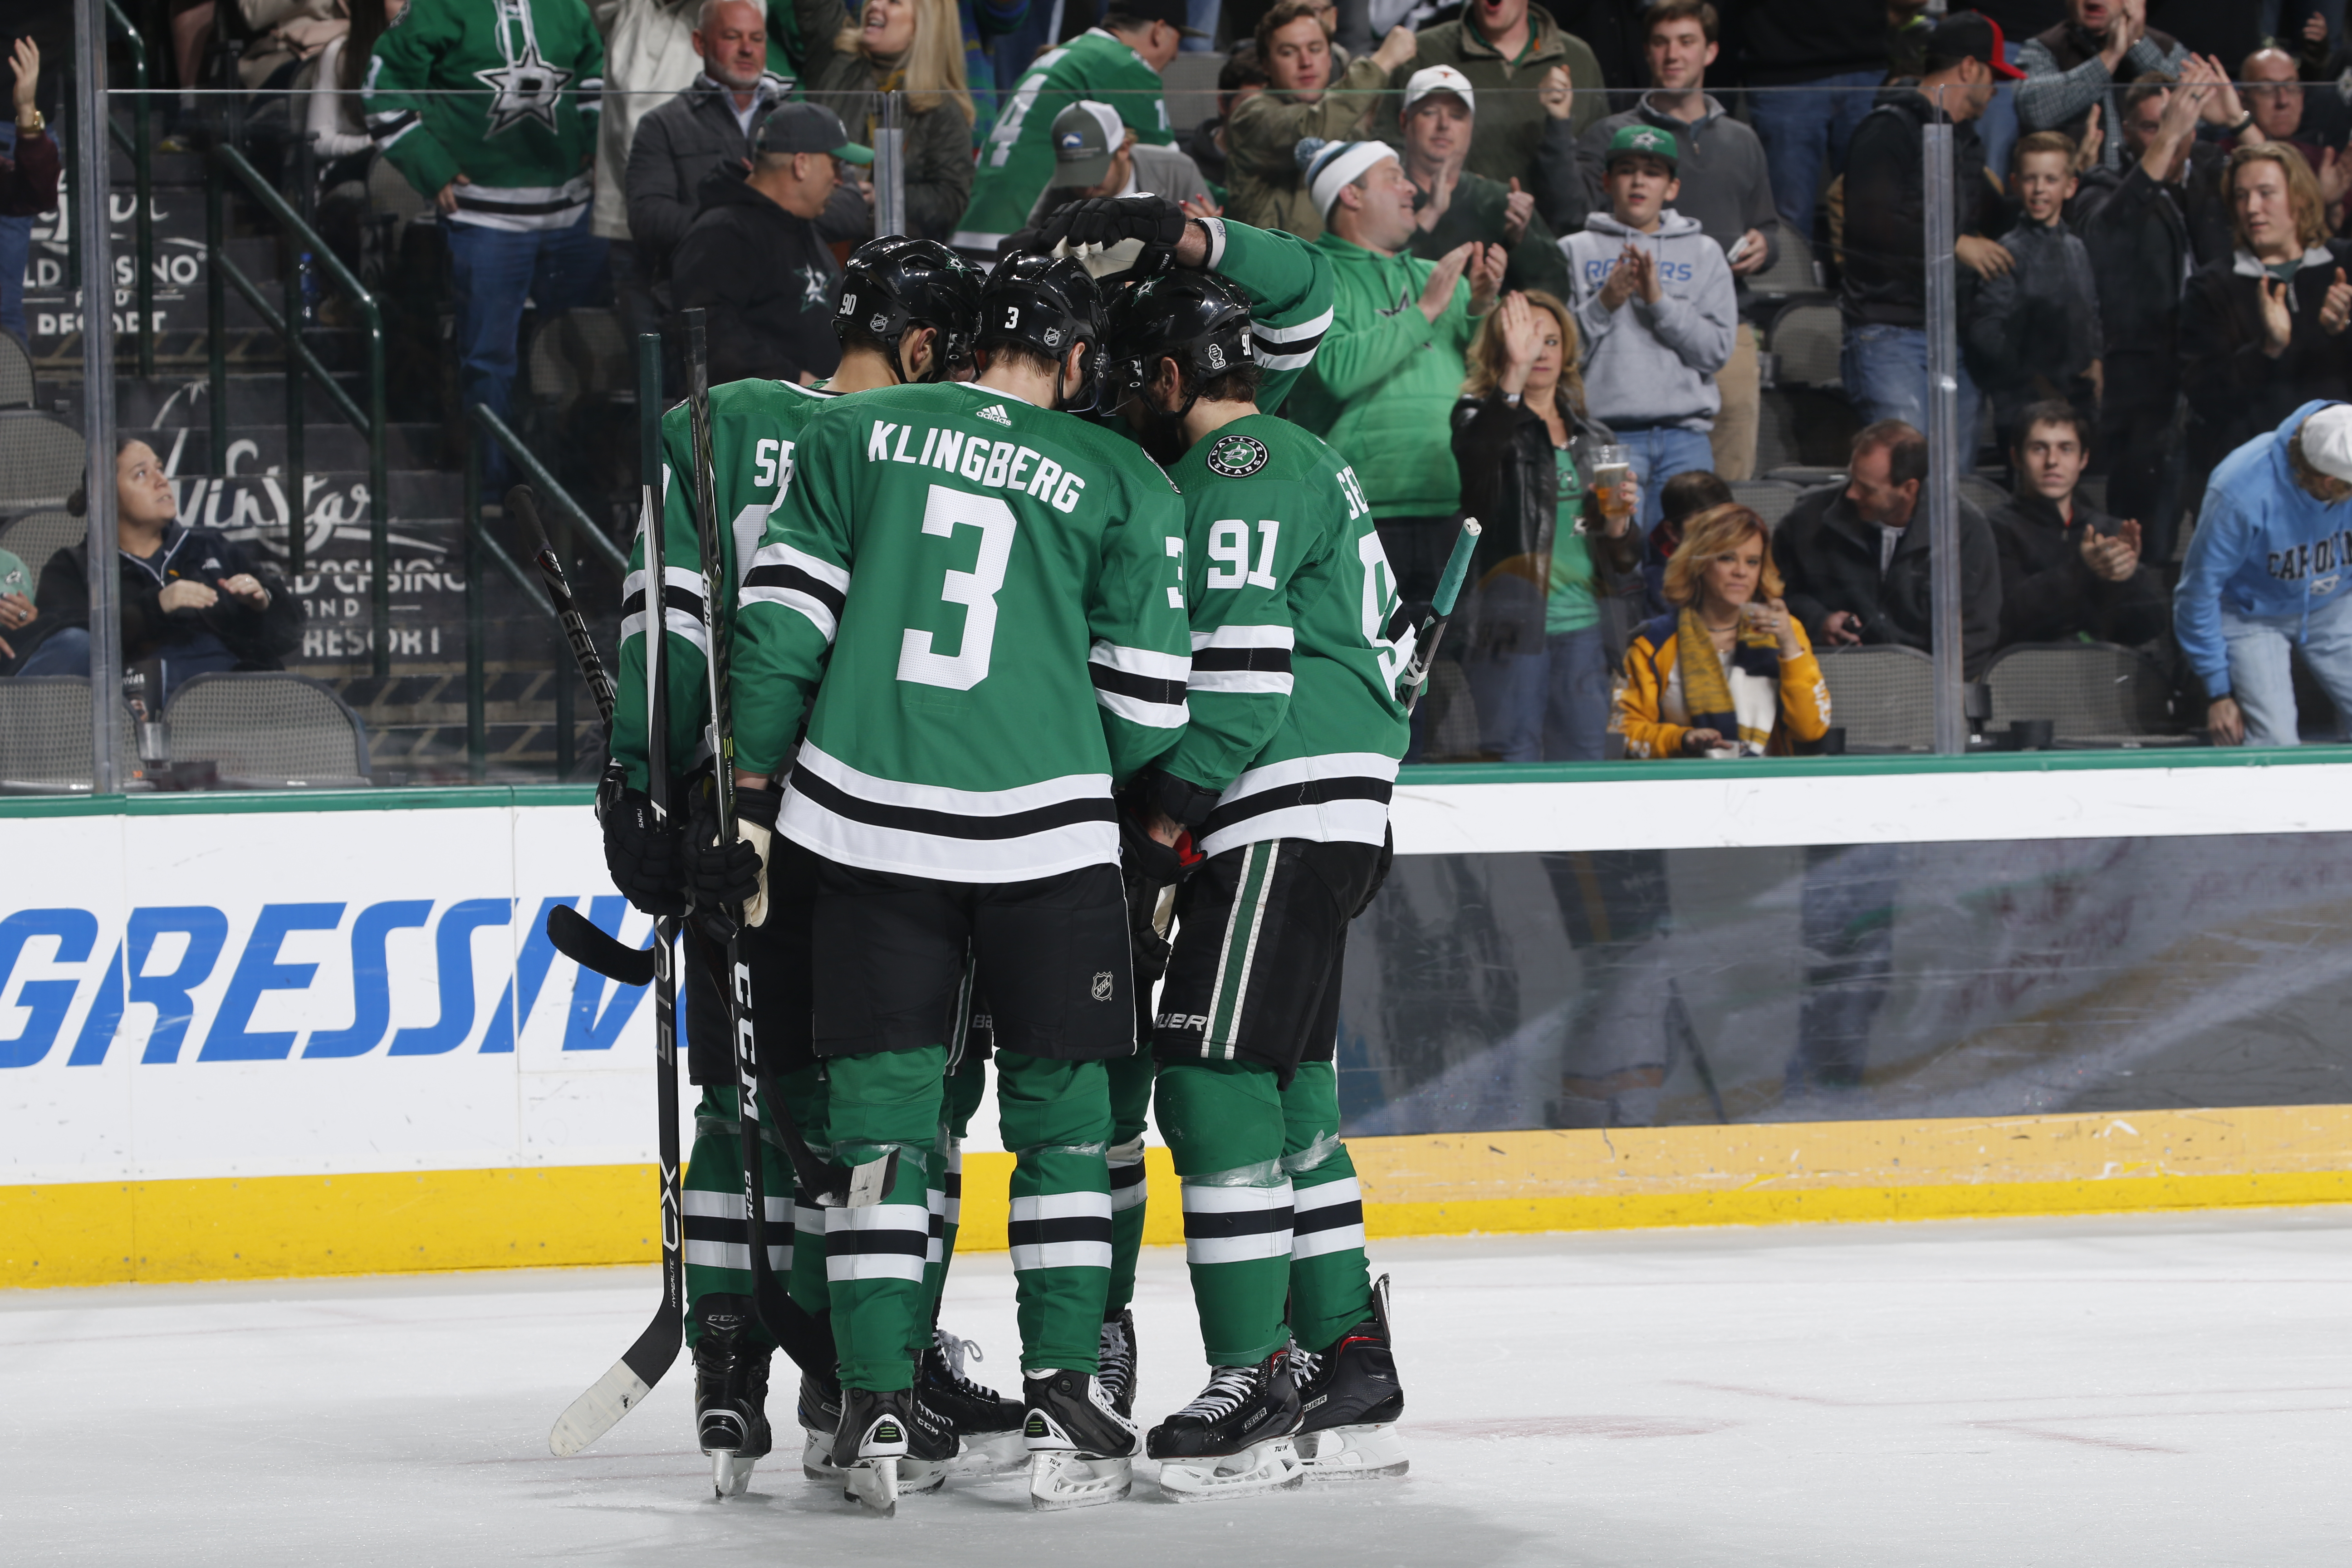 Dallas Stars shoot themselves in the foot losing 4-0 to the St. Louis Blues